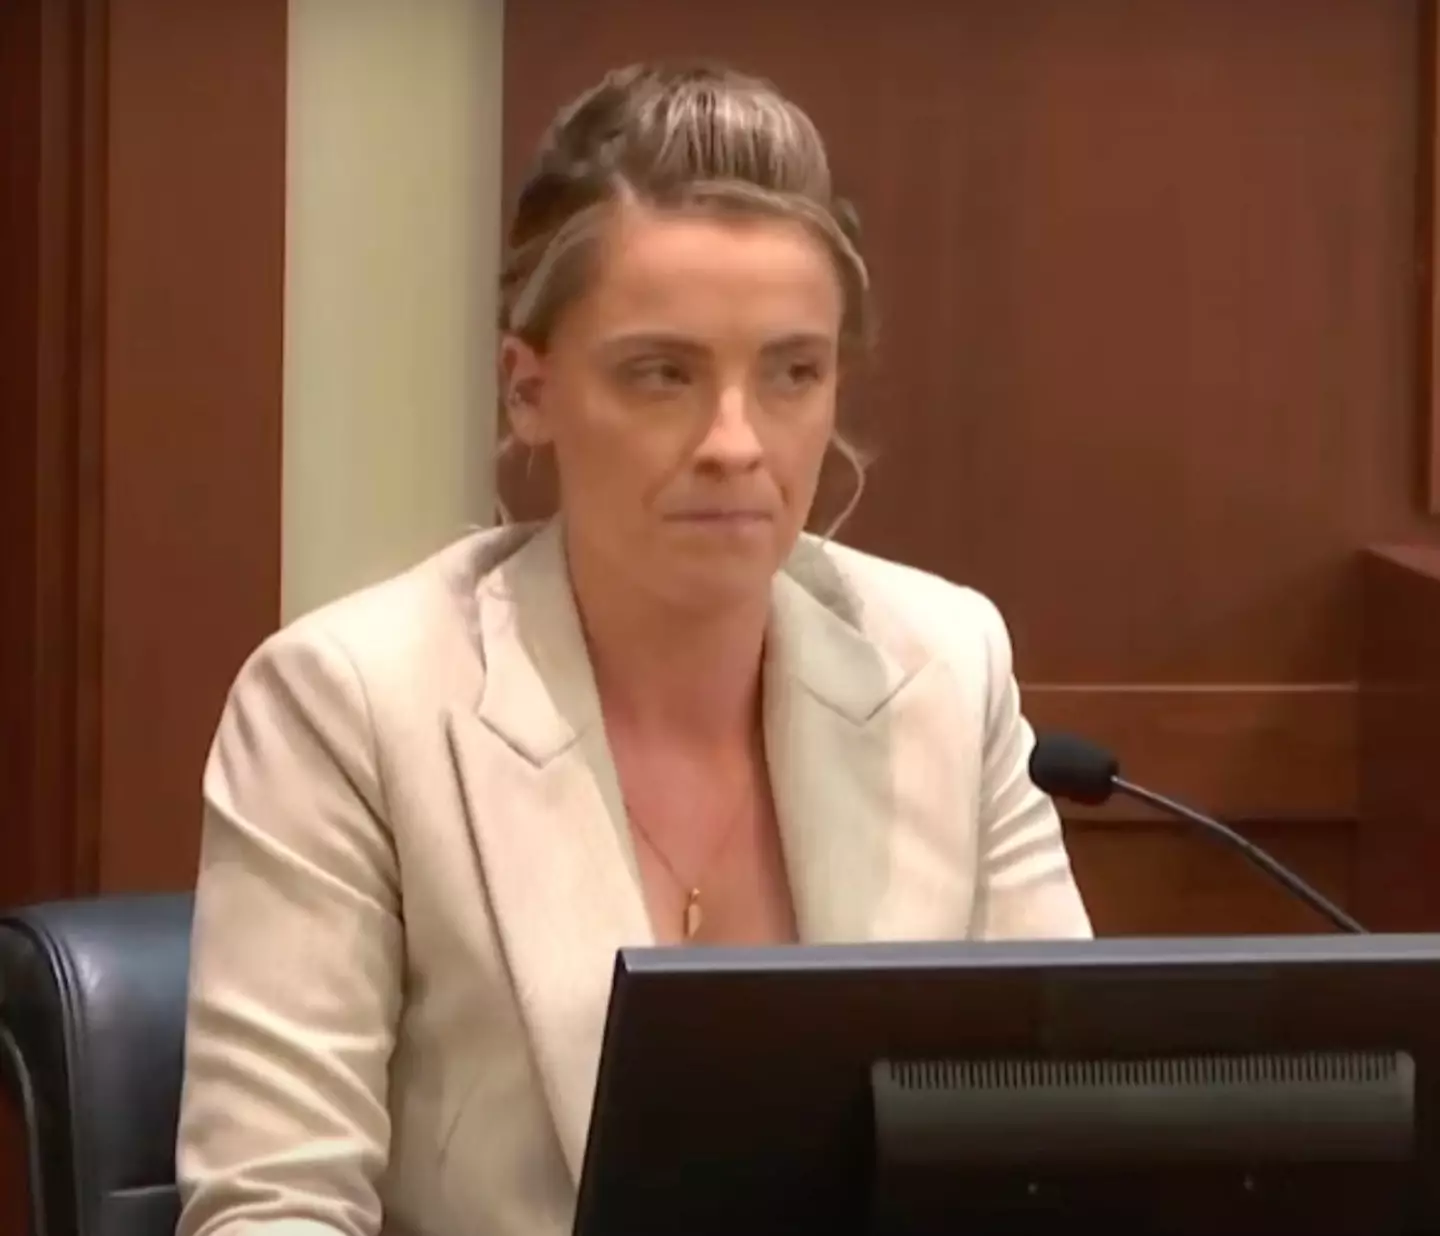 Amber Heard's sister Whitney Henriquez gave testimony in the ongoing trial.